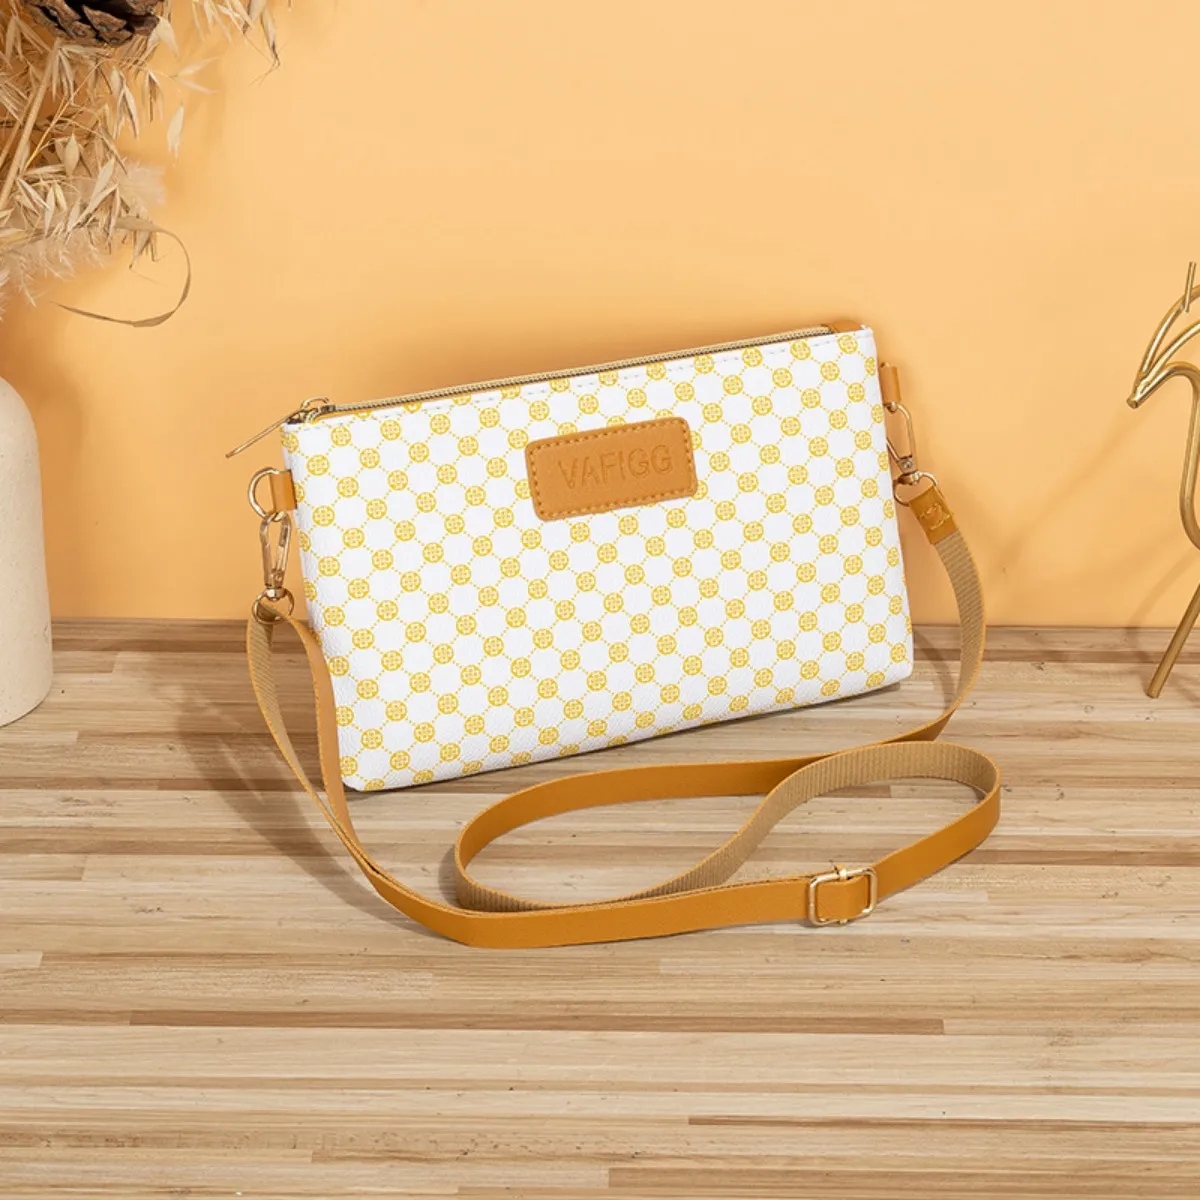 white louis vuitton bag with colored letters